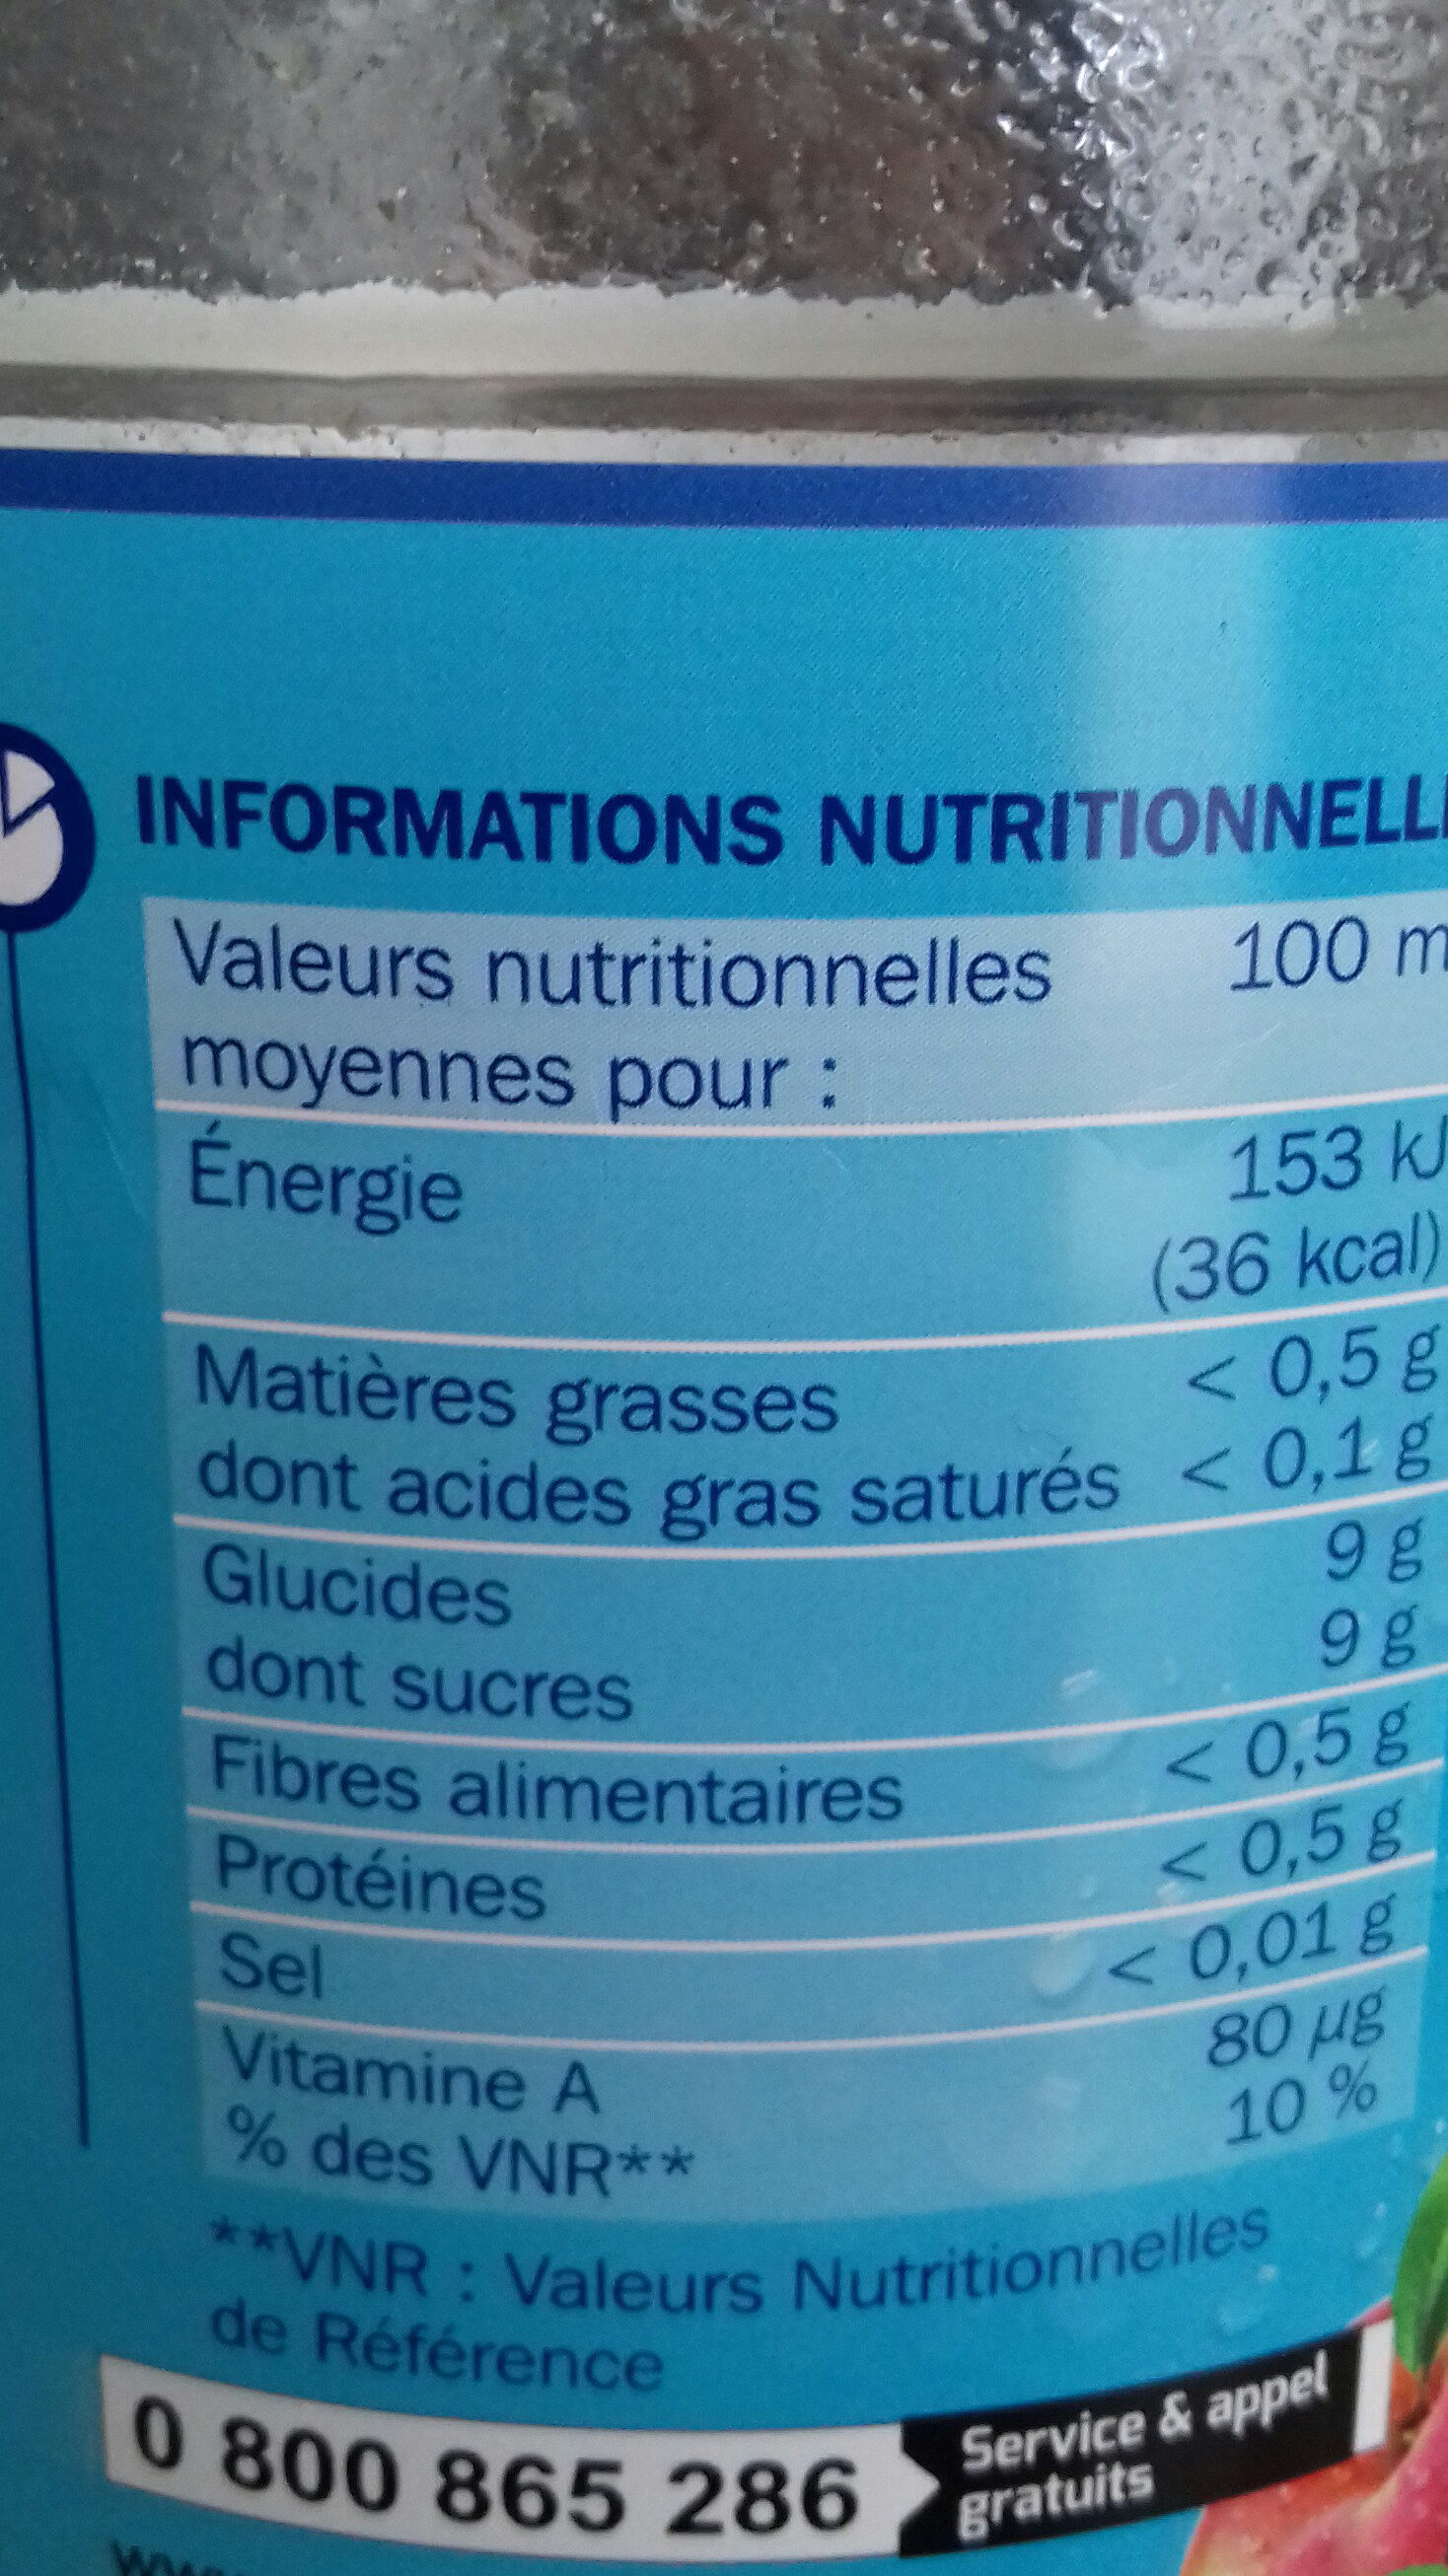 Nectar multifruits - bouteille - Ingredients - fr